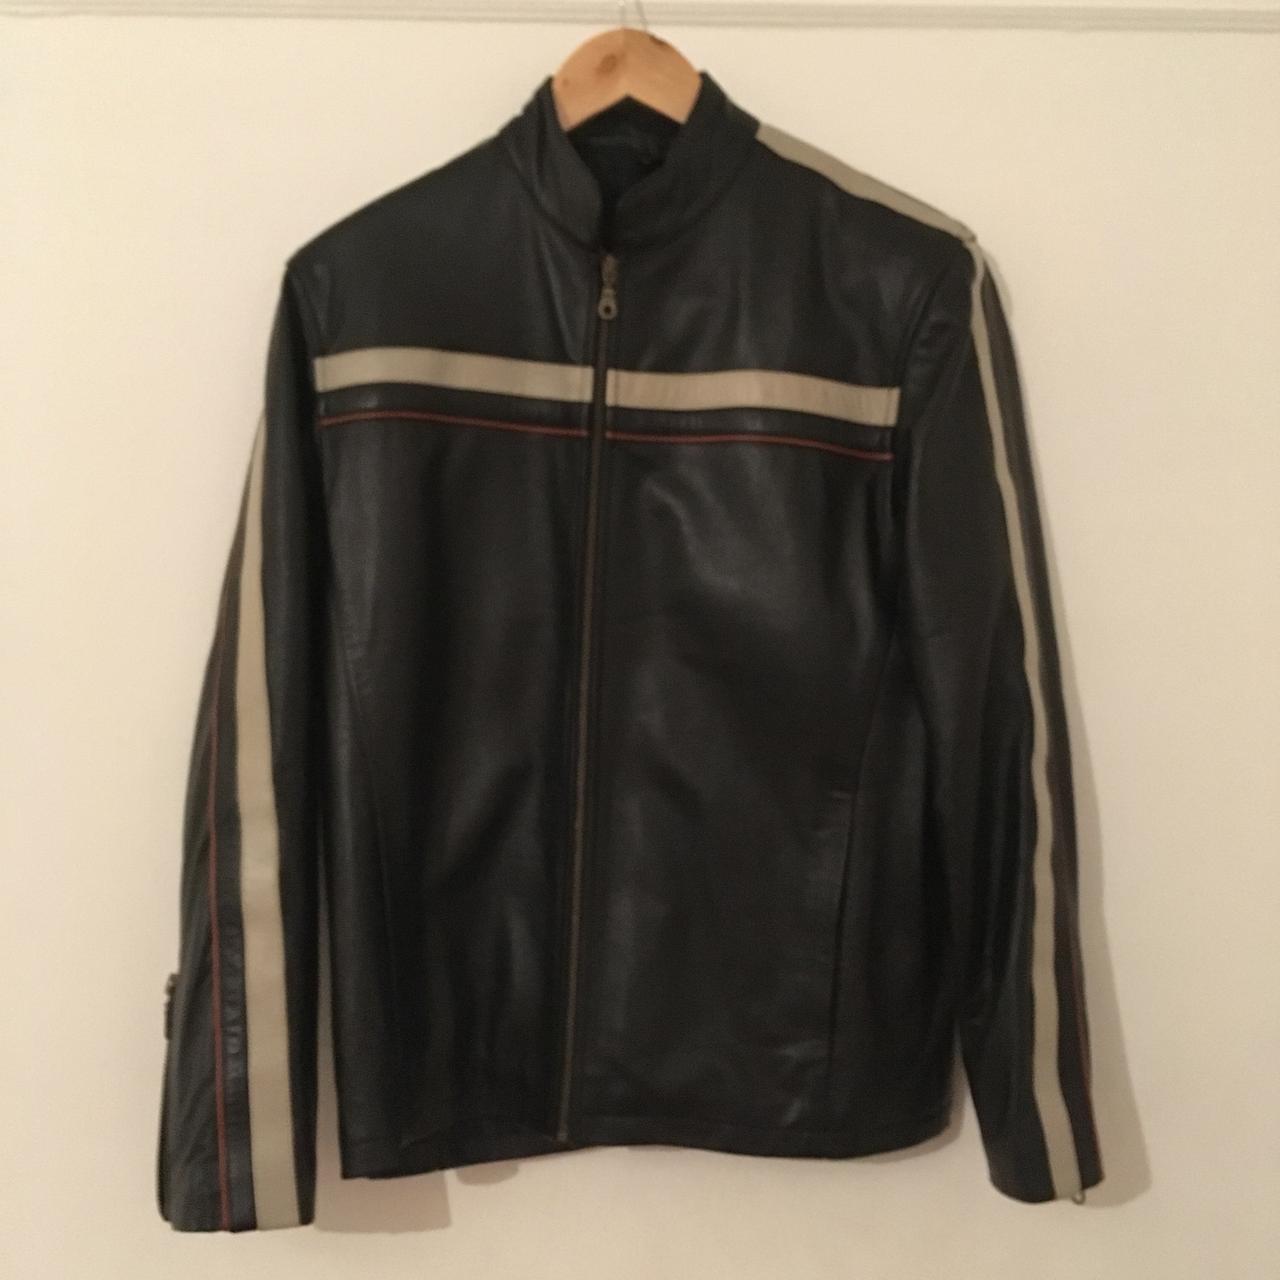 ️Black leather jacket with white and red stripe... - Depop